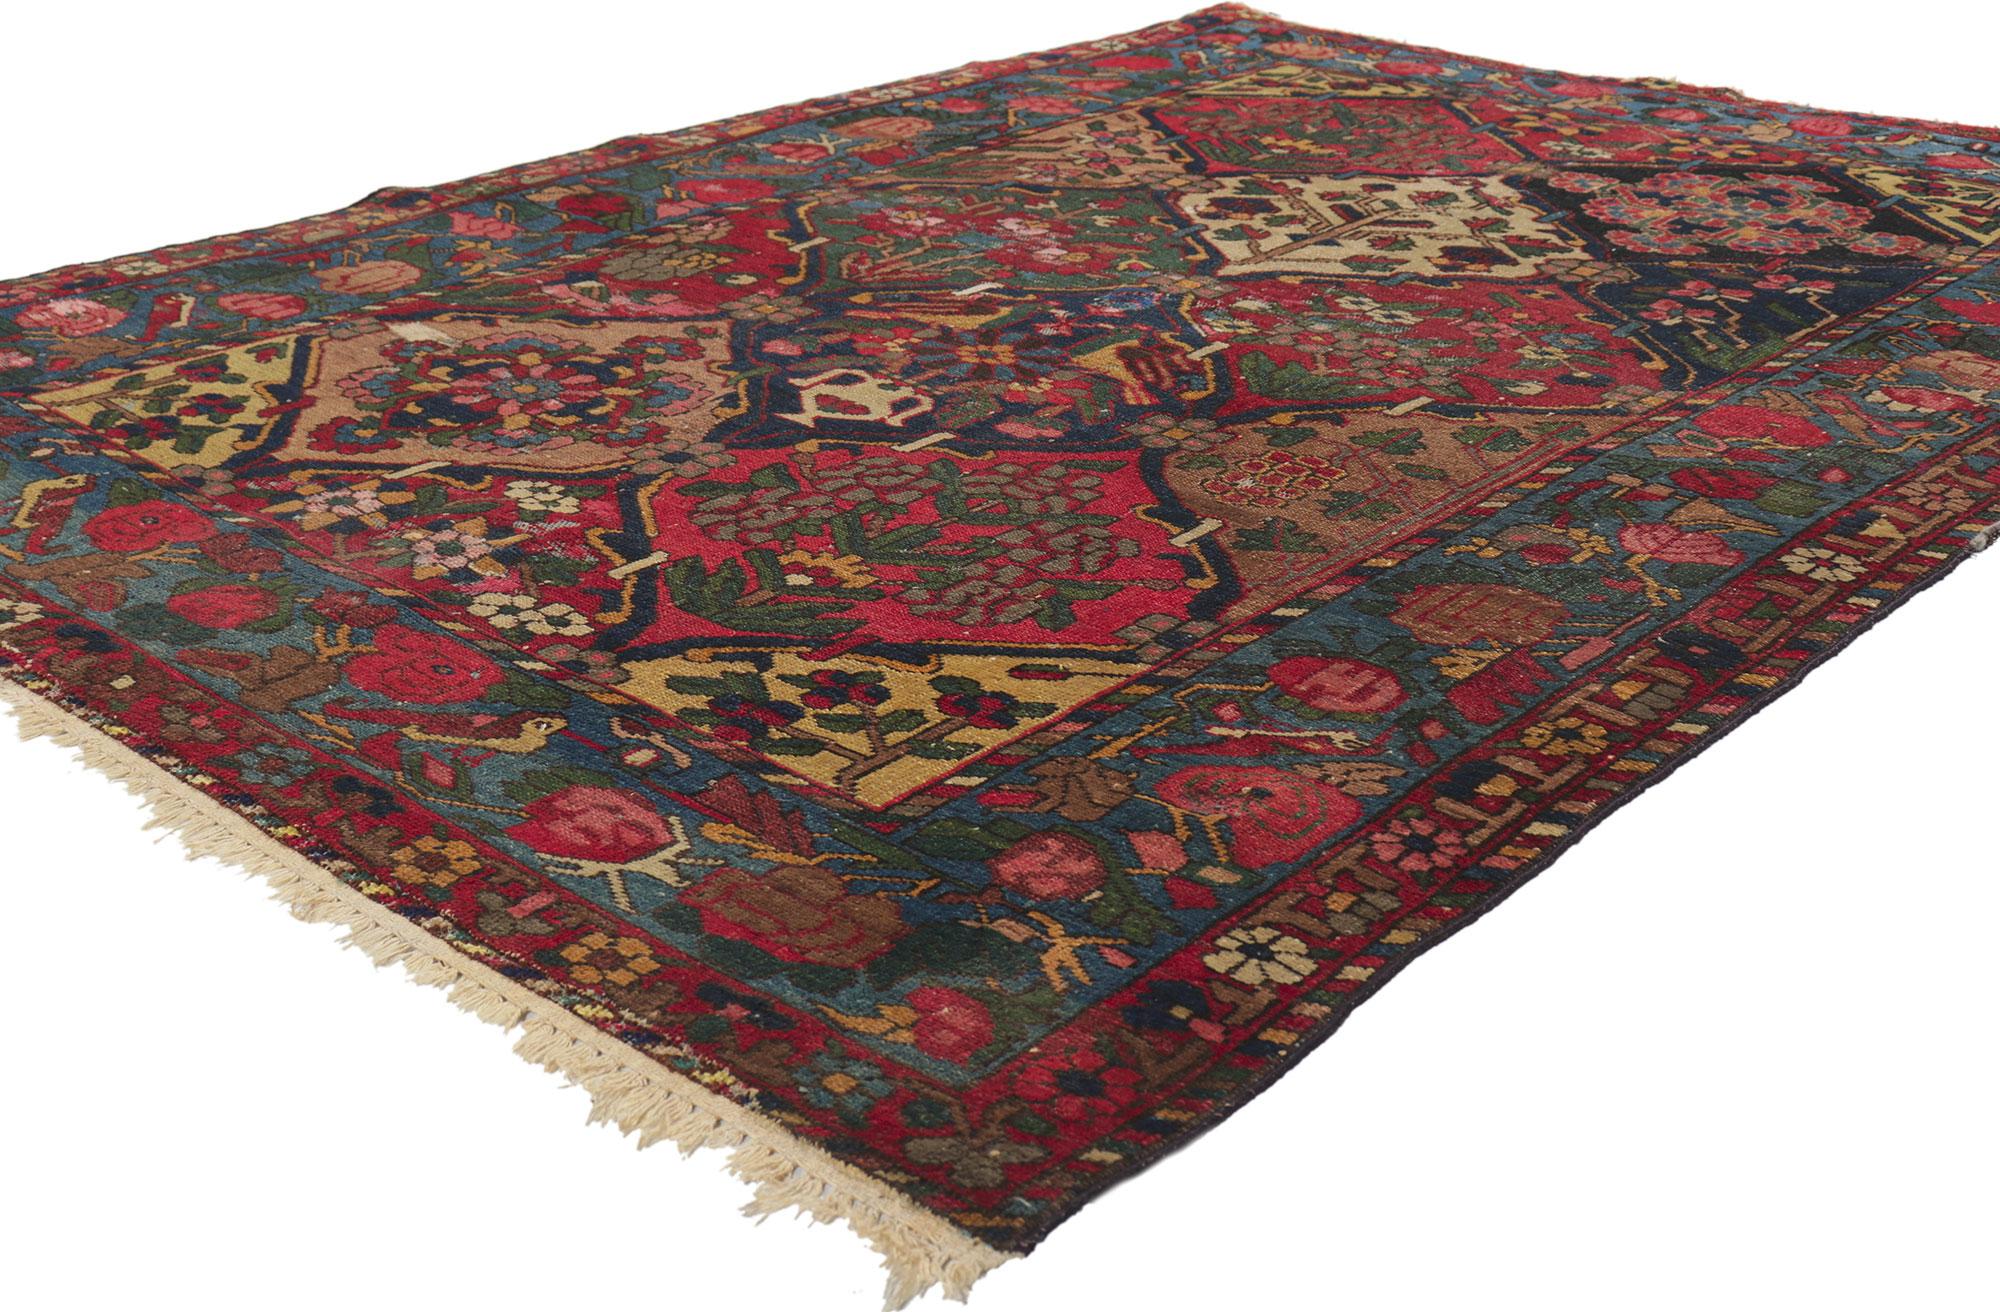 78416 Antique Persian Bakhtiari rug, 04'08 x 06'05.
With its classic four seasons panel design, incredible detail and texture, this hand-knotted wool antique Persian Bakhtiari rug is poised to impress. The eye-catching botanical pattern and